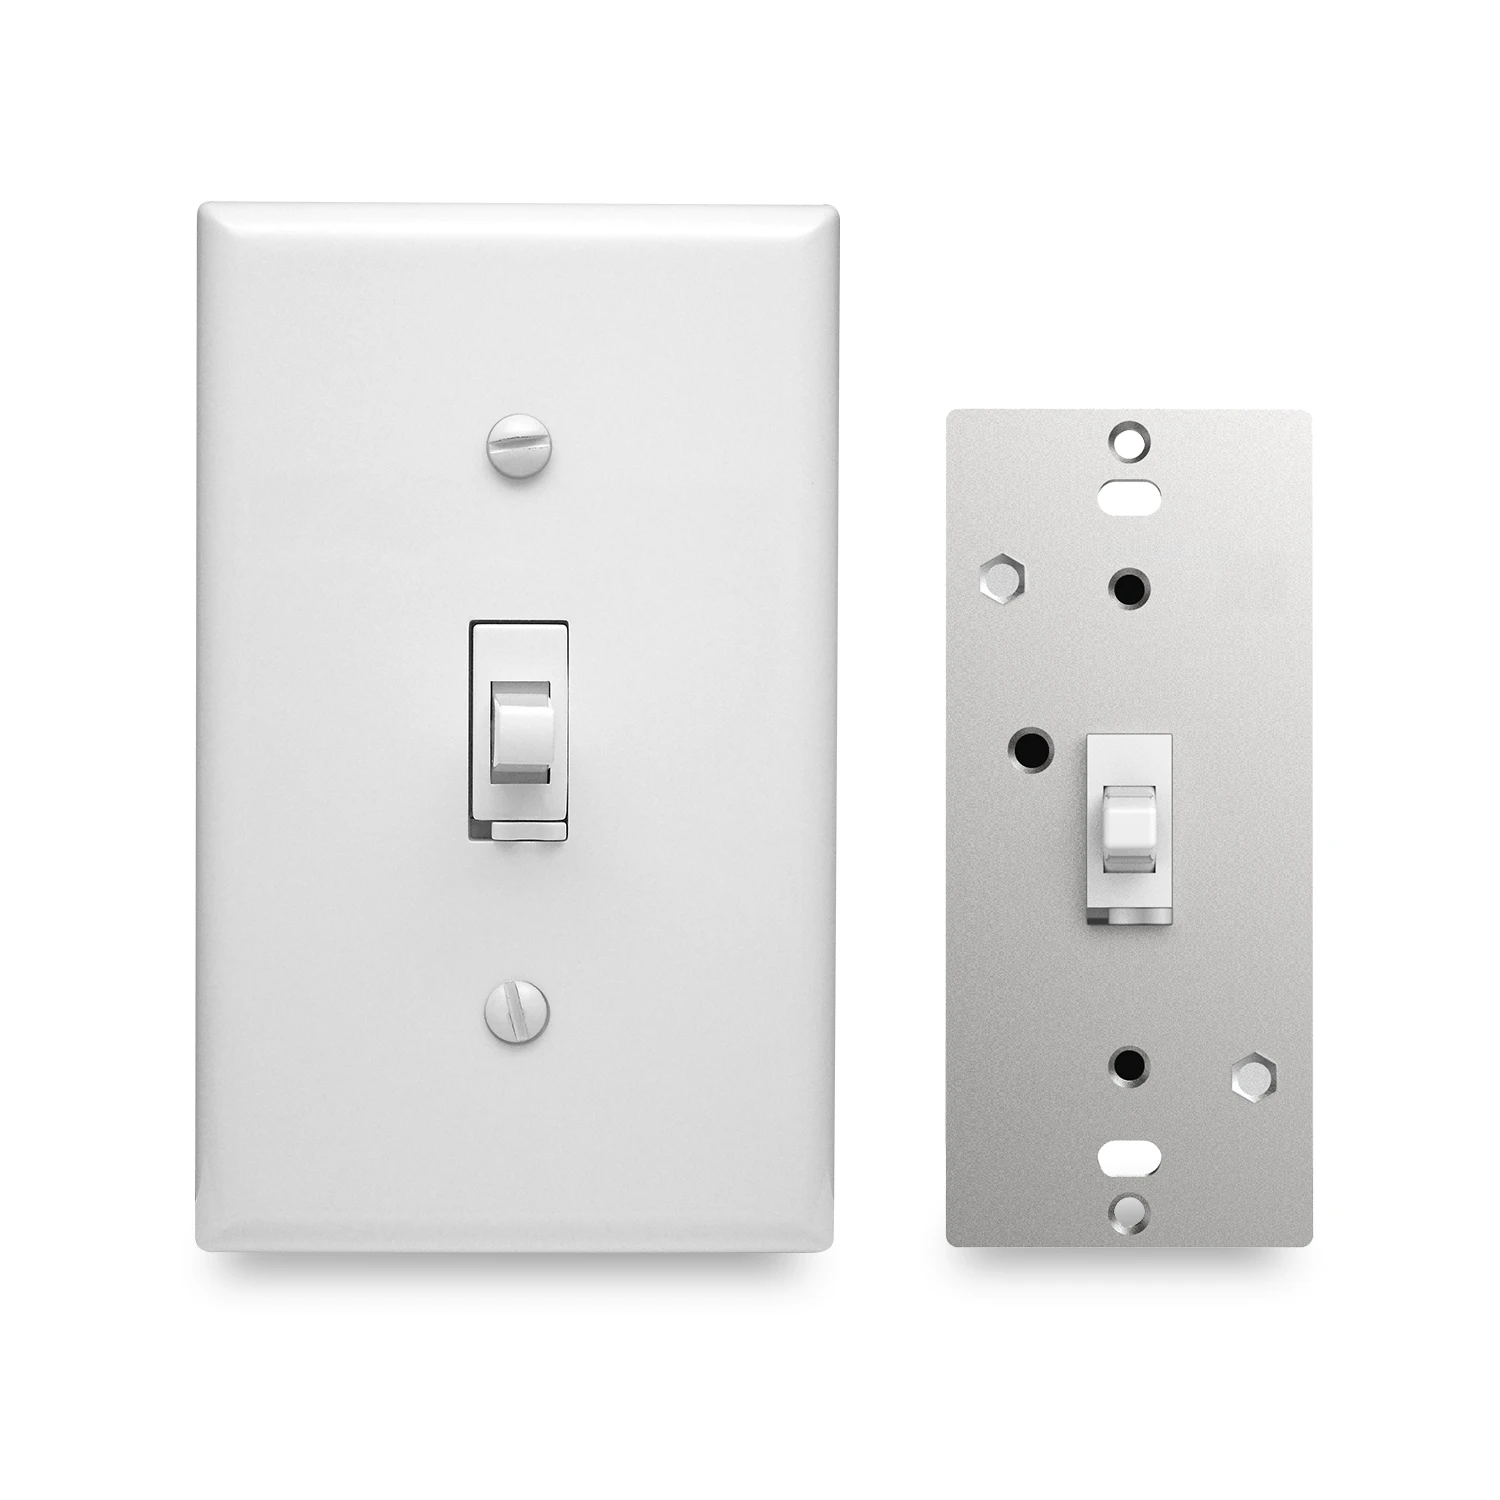 ZW31T Z-wave Plus Smart Home Wireless Electrical Toggle Switch Included Led Dimmer